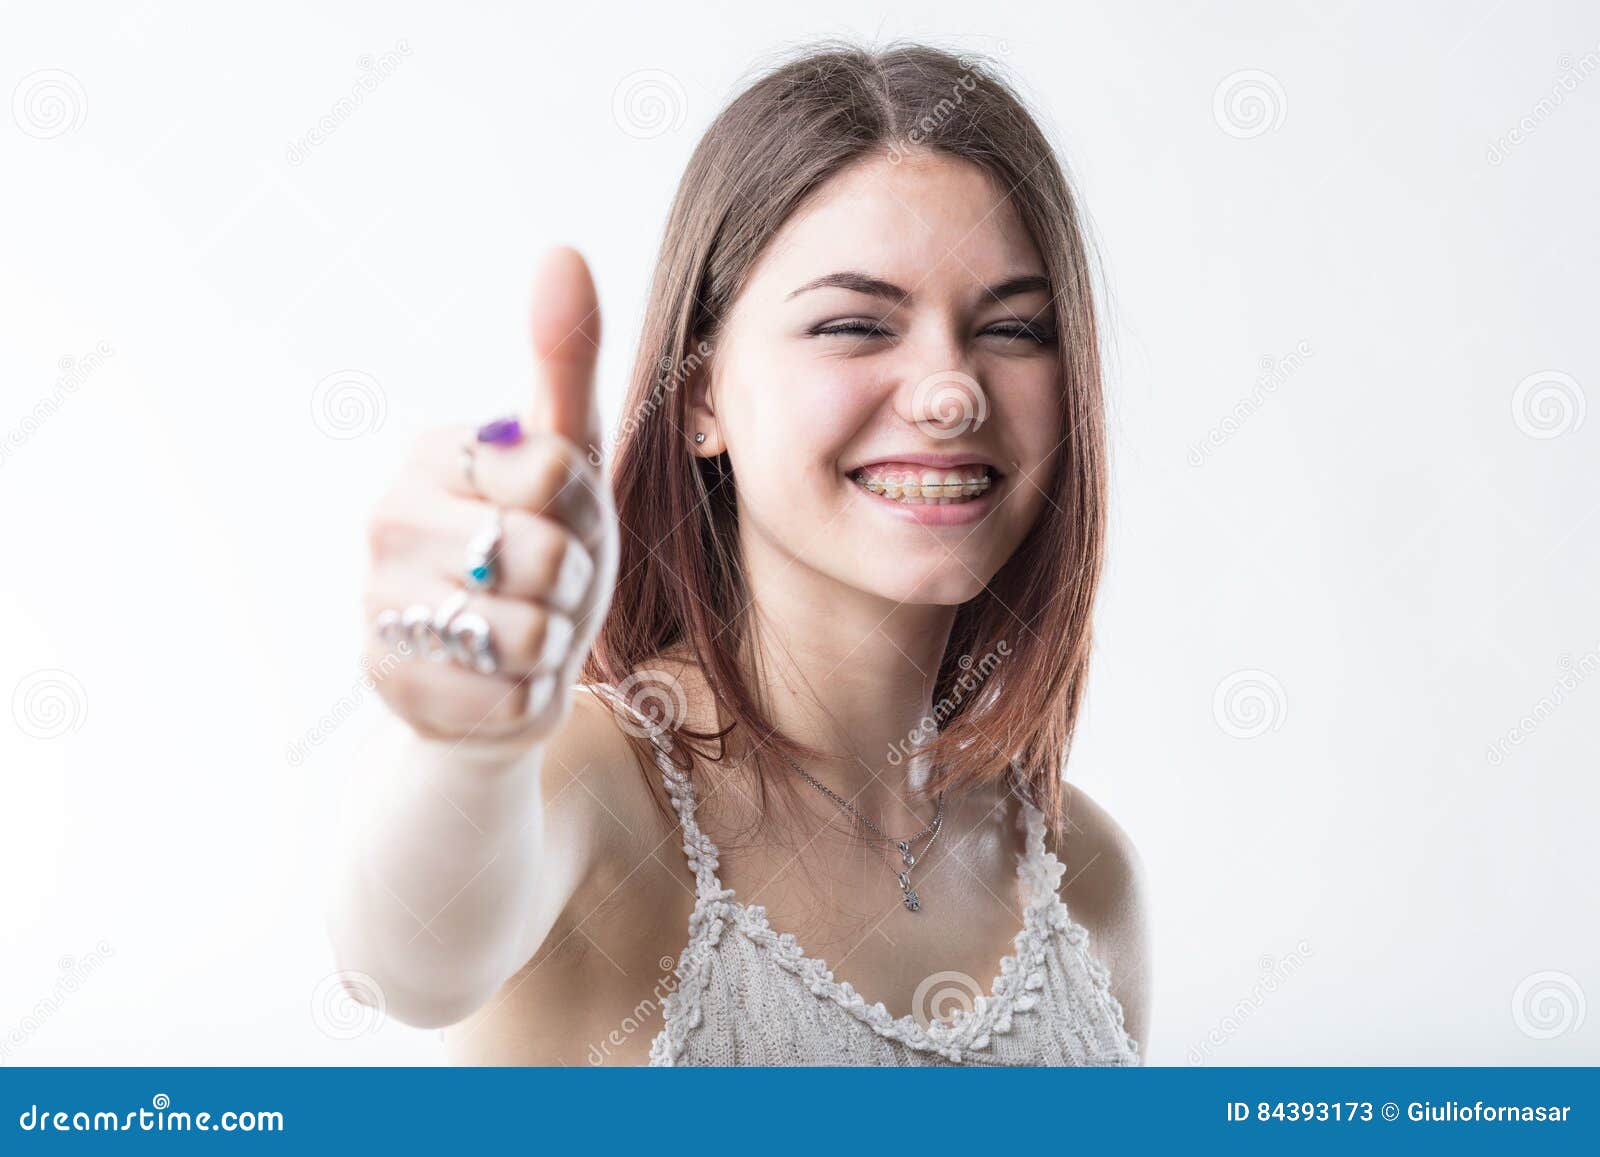 Girl with a Retainer Thumb Up Stock Image - Image of dental, beauty ...